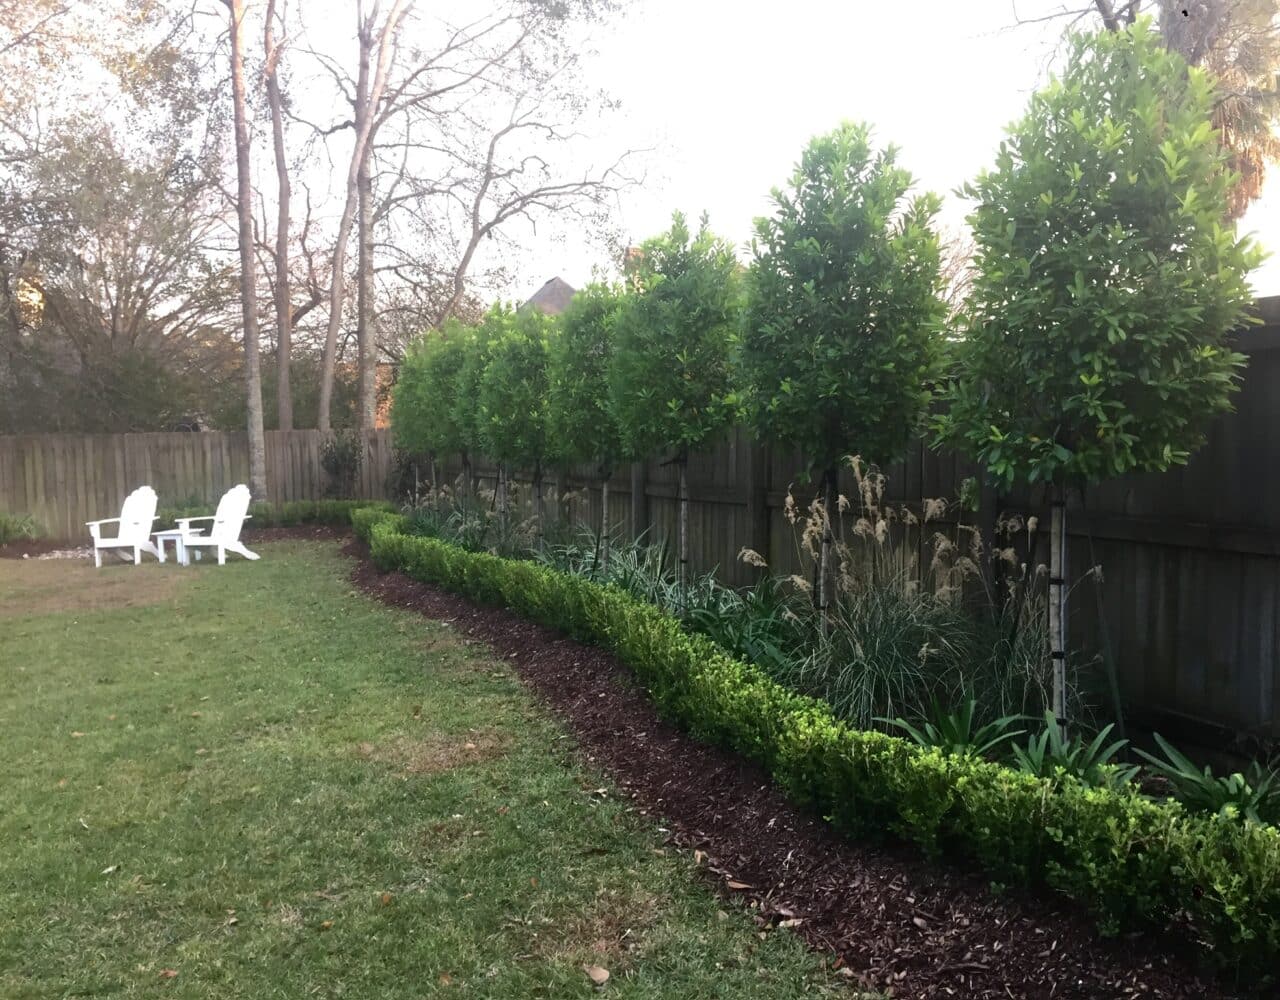 Formal & Woodsy Backyard Landscape Design And Architecture - Baton Rouge